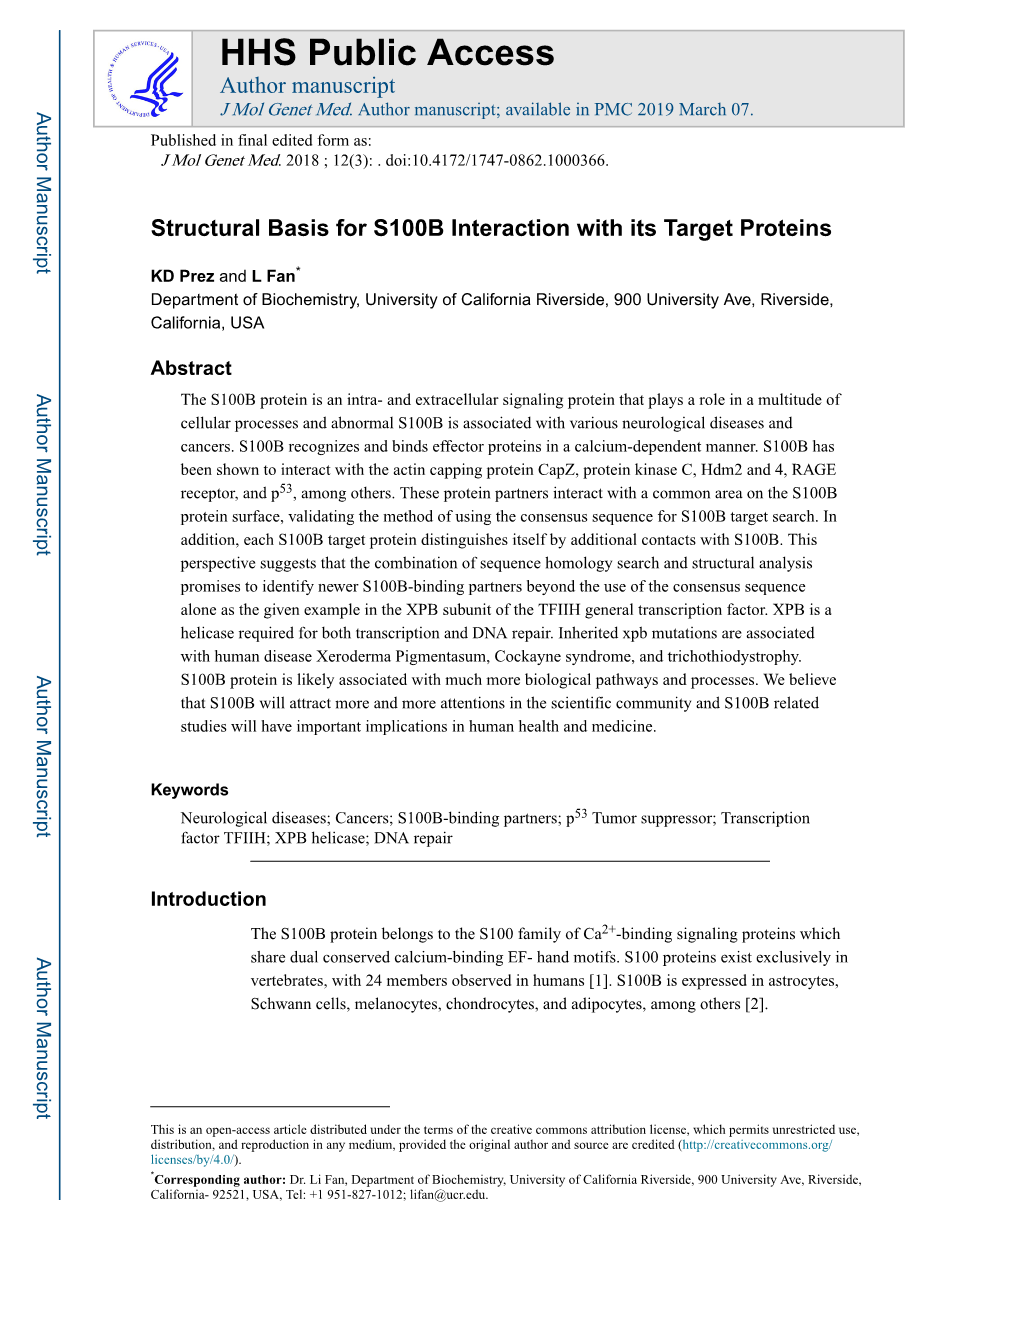 Structural Basis for S100B Interaction with Its Target Proteins